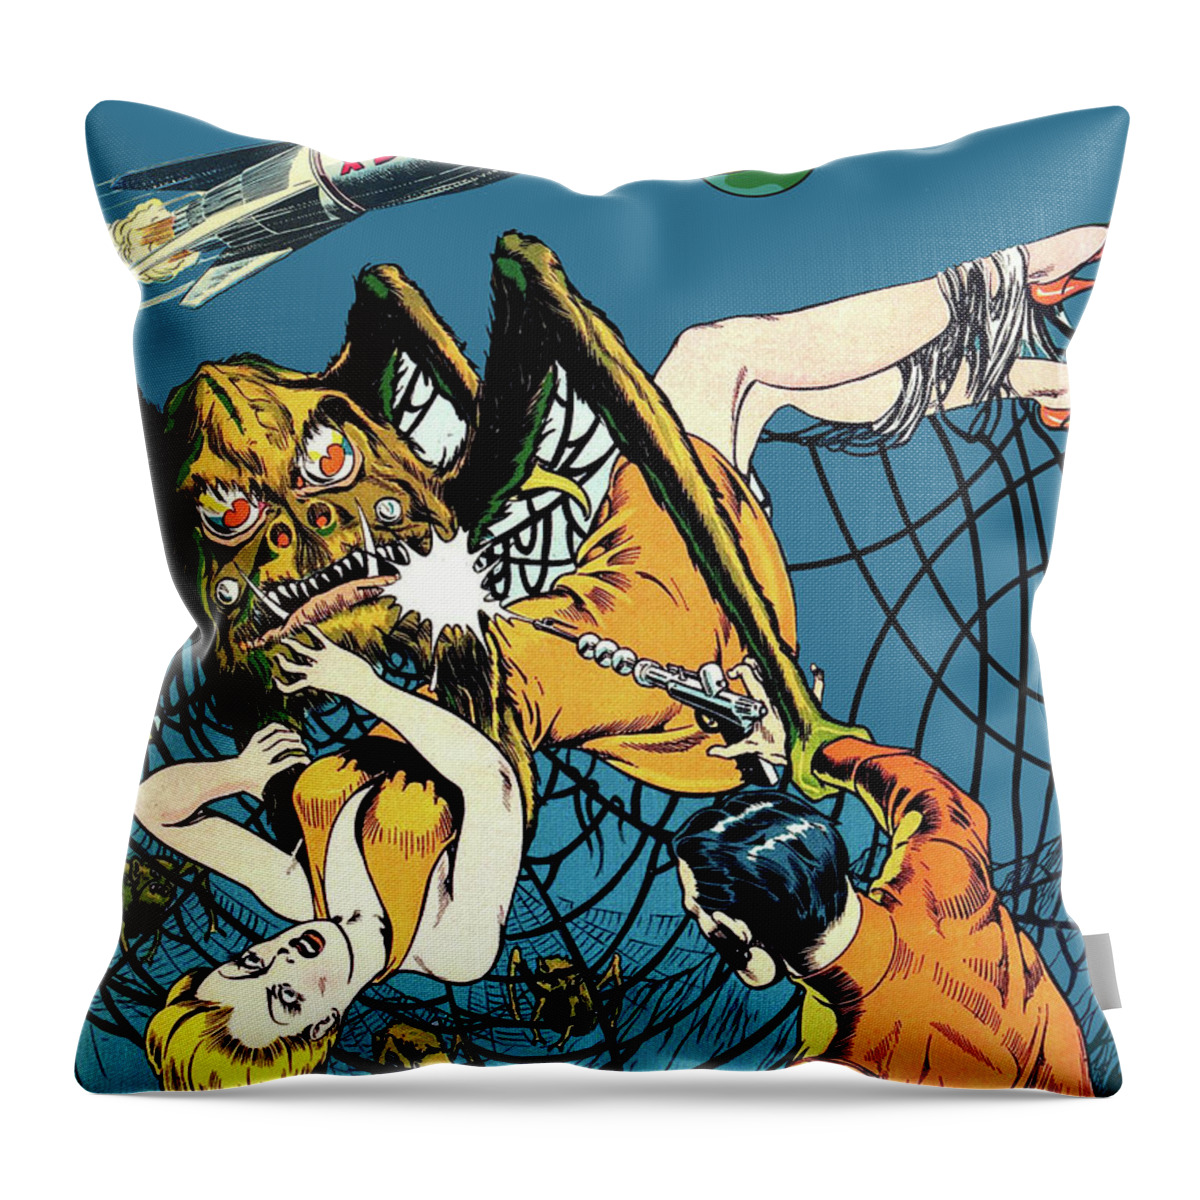 Giant Throw Pillow featuring the digital art Battle in the Nest of Giant Spider by Long Shot